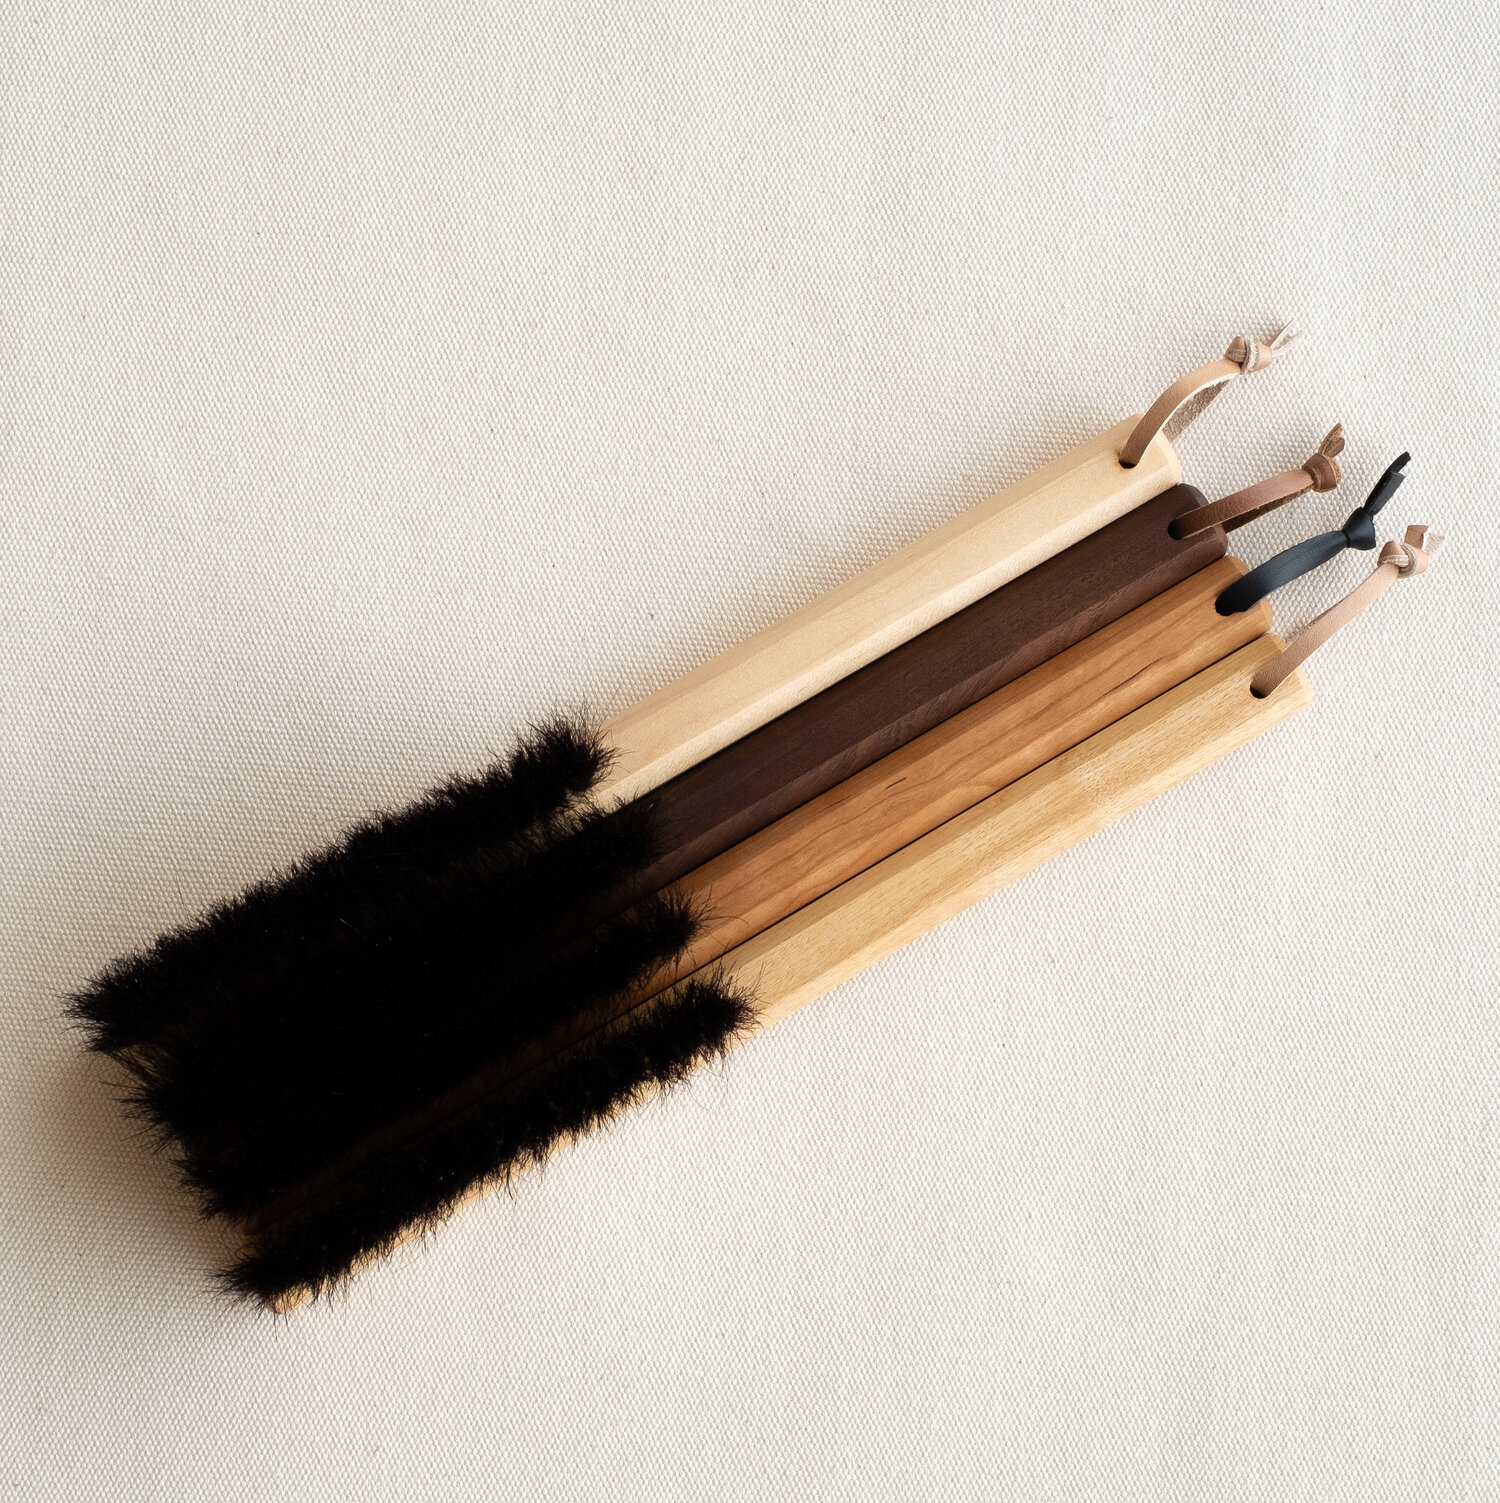 Horse Hair Paint Brushes from the seriesThings we no longer use